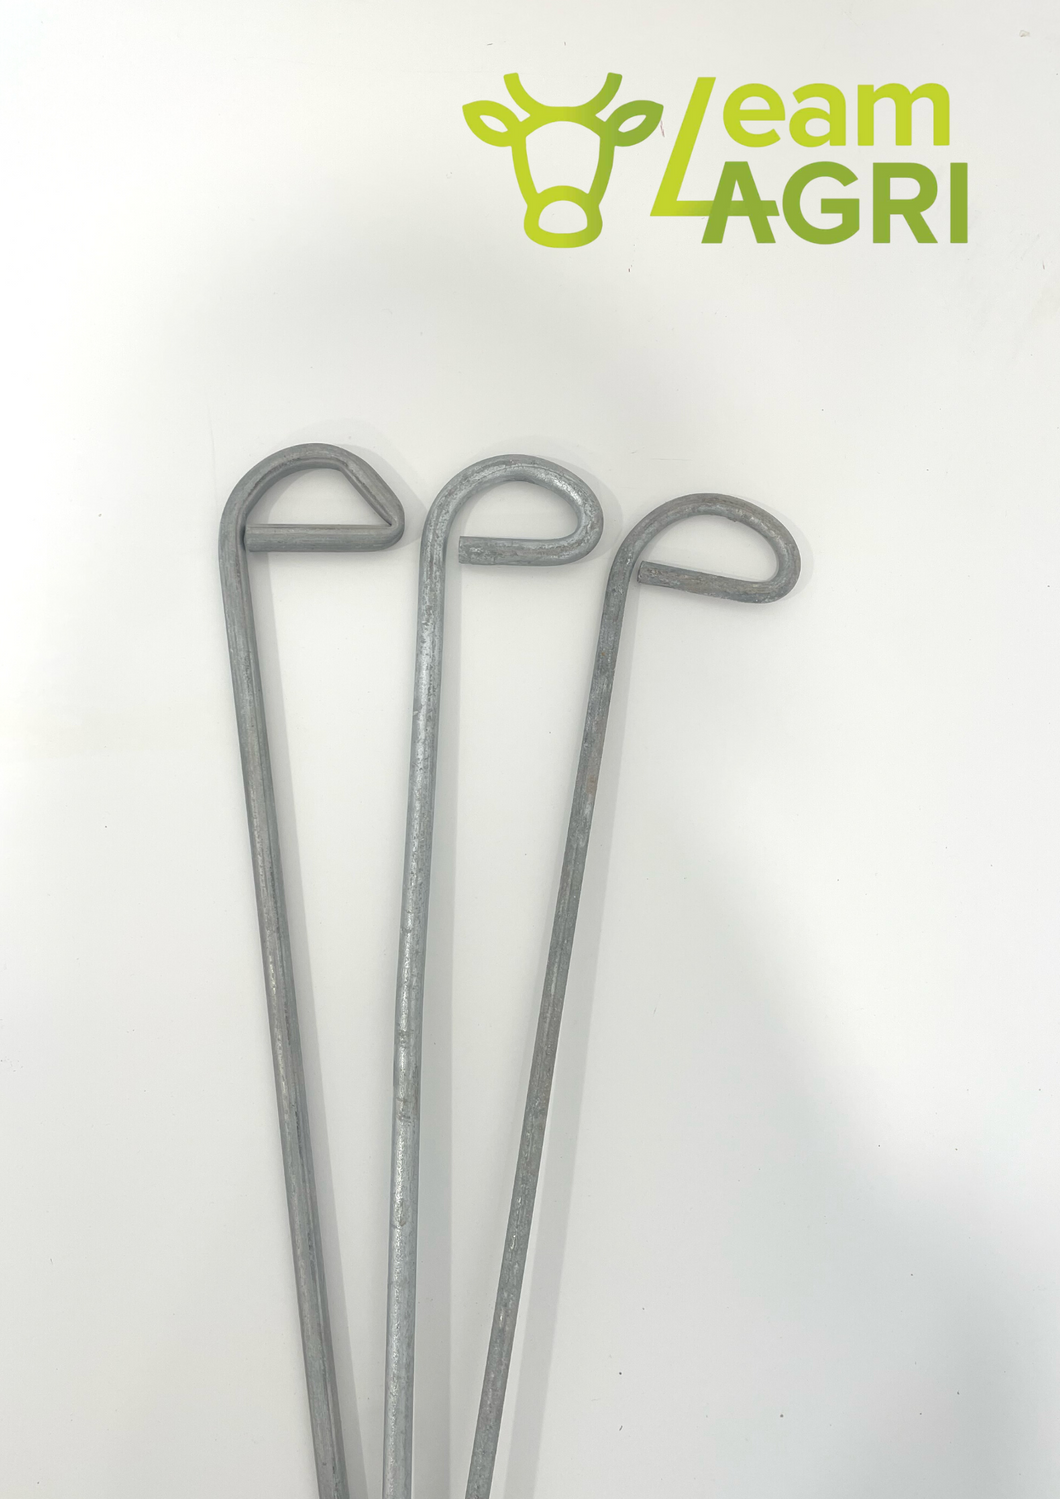 Sheep Hurdle Pins from Leam Agri Ltd, Tempo, County Fermanagh, Northern Ireland. Serving Fermanagh, Tyrone, Antrim, Down, Londonderry, Armagh, Cavan, Leitrim, Sligo, Monaghan, Donegal, Dublin Carlow, Clare, Cork, Galway, Kerry, Kildare, Kilkenny, Laois, Limerick, Longford, Louth, Mayo, Meath, Monaghan, Offaly, Roscommon, Tipperary, Waterford, Westmeath, Wexford and Wicklow and throughout the United Kingdom